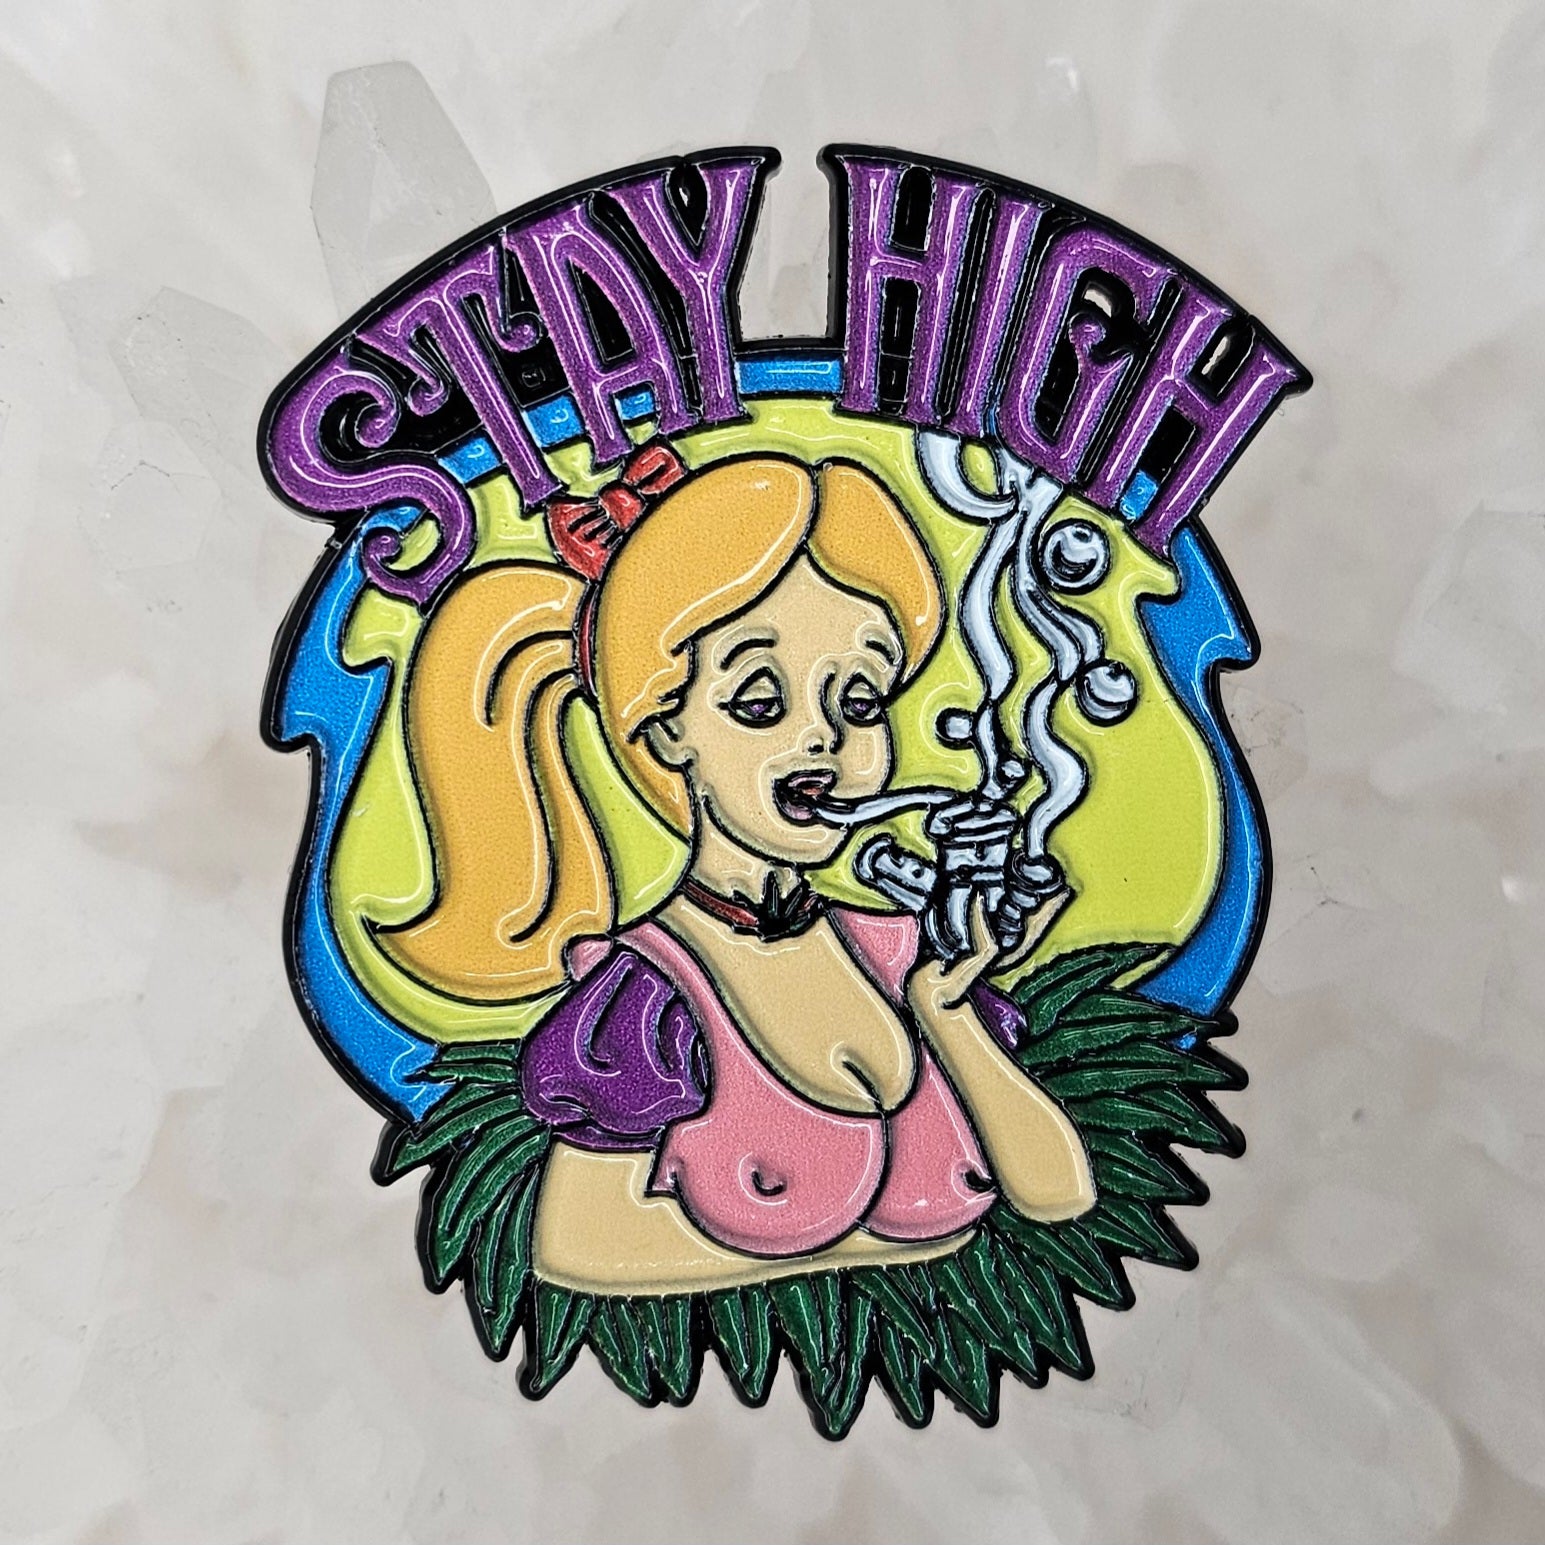 Stay High Alice Pin Up In Wonderland Weed Enamel Pins Hat Pins Lapel Pin Brooch Badge Festival Pin